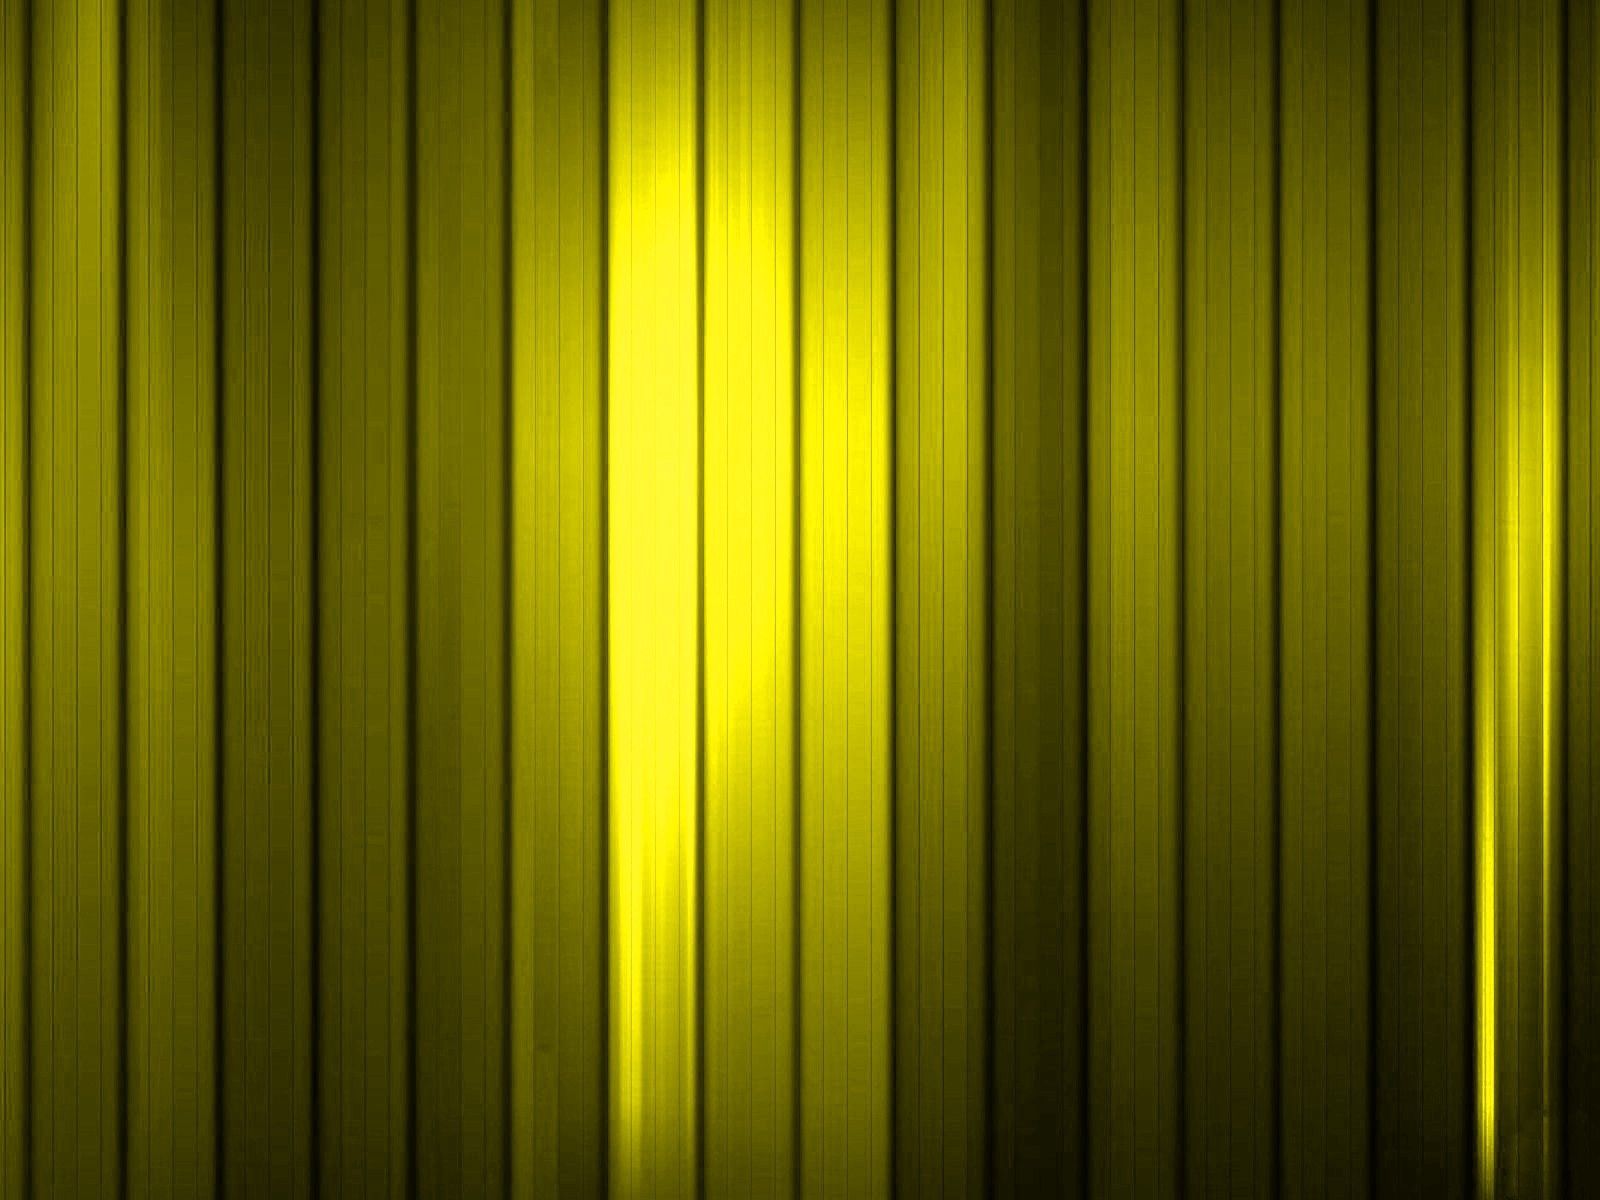 57160 download wallpaper vertical, background, shining, shine, bright, texture, lines, textures, brilliance screensavers and pictures for free